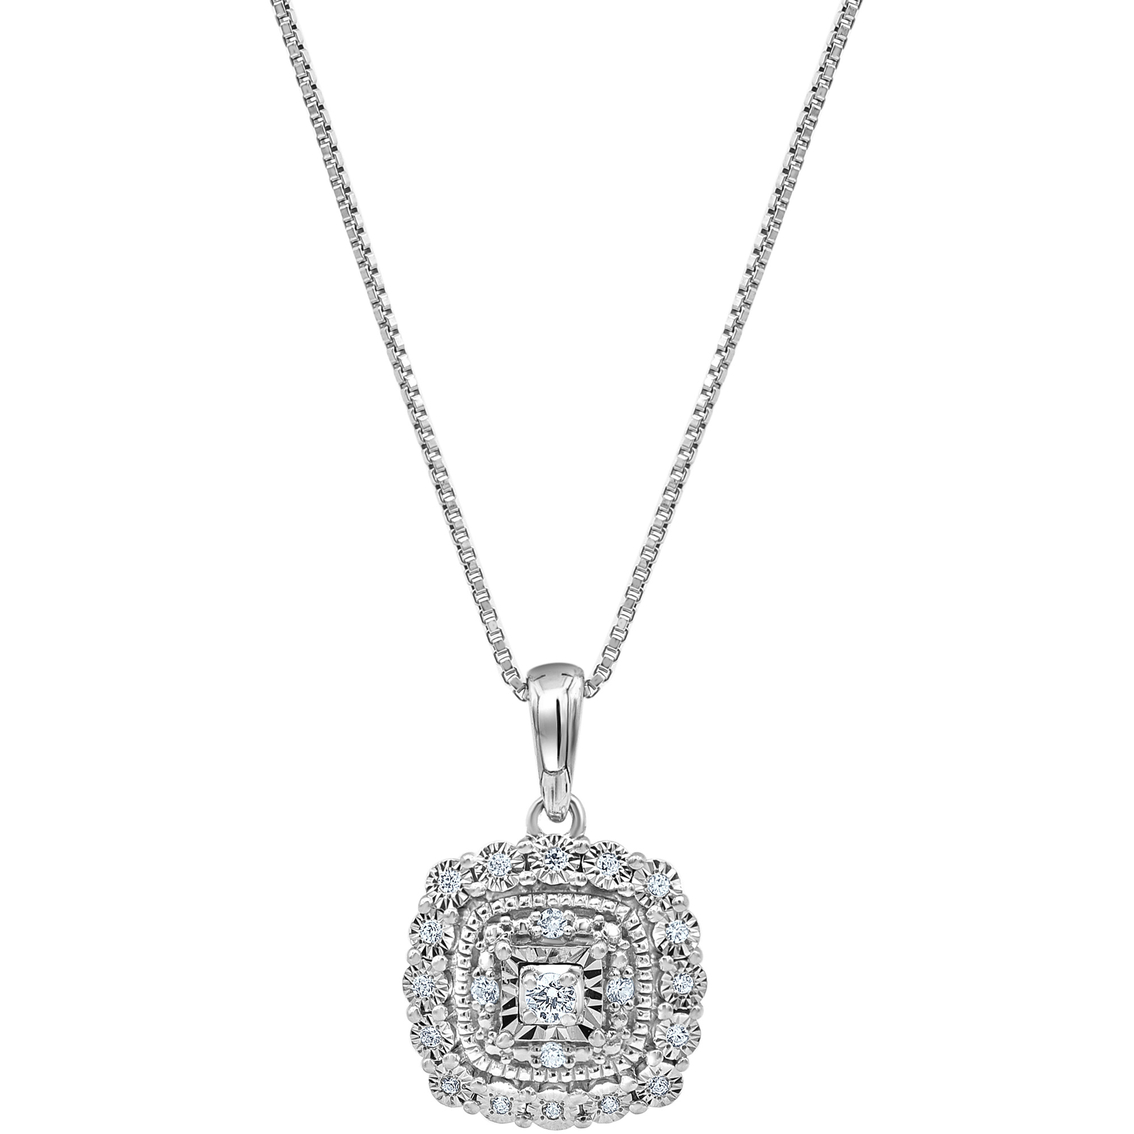 Sterling Silver 1/3 CTW Diamond Cushion Shape Ring, Earring and Pendant Set - Image 3 of 4